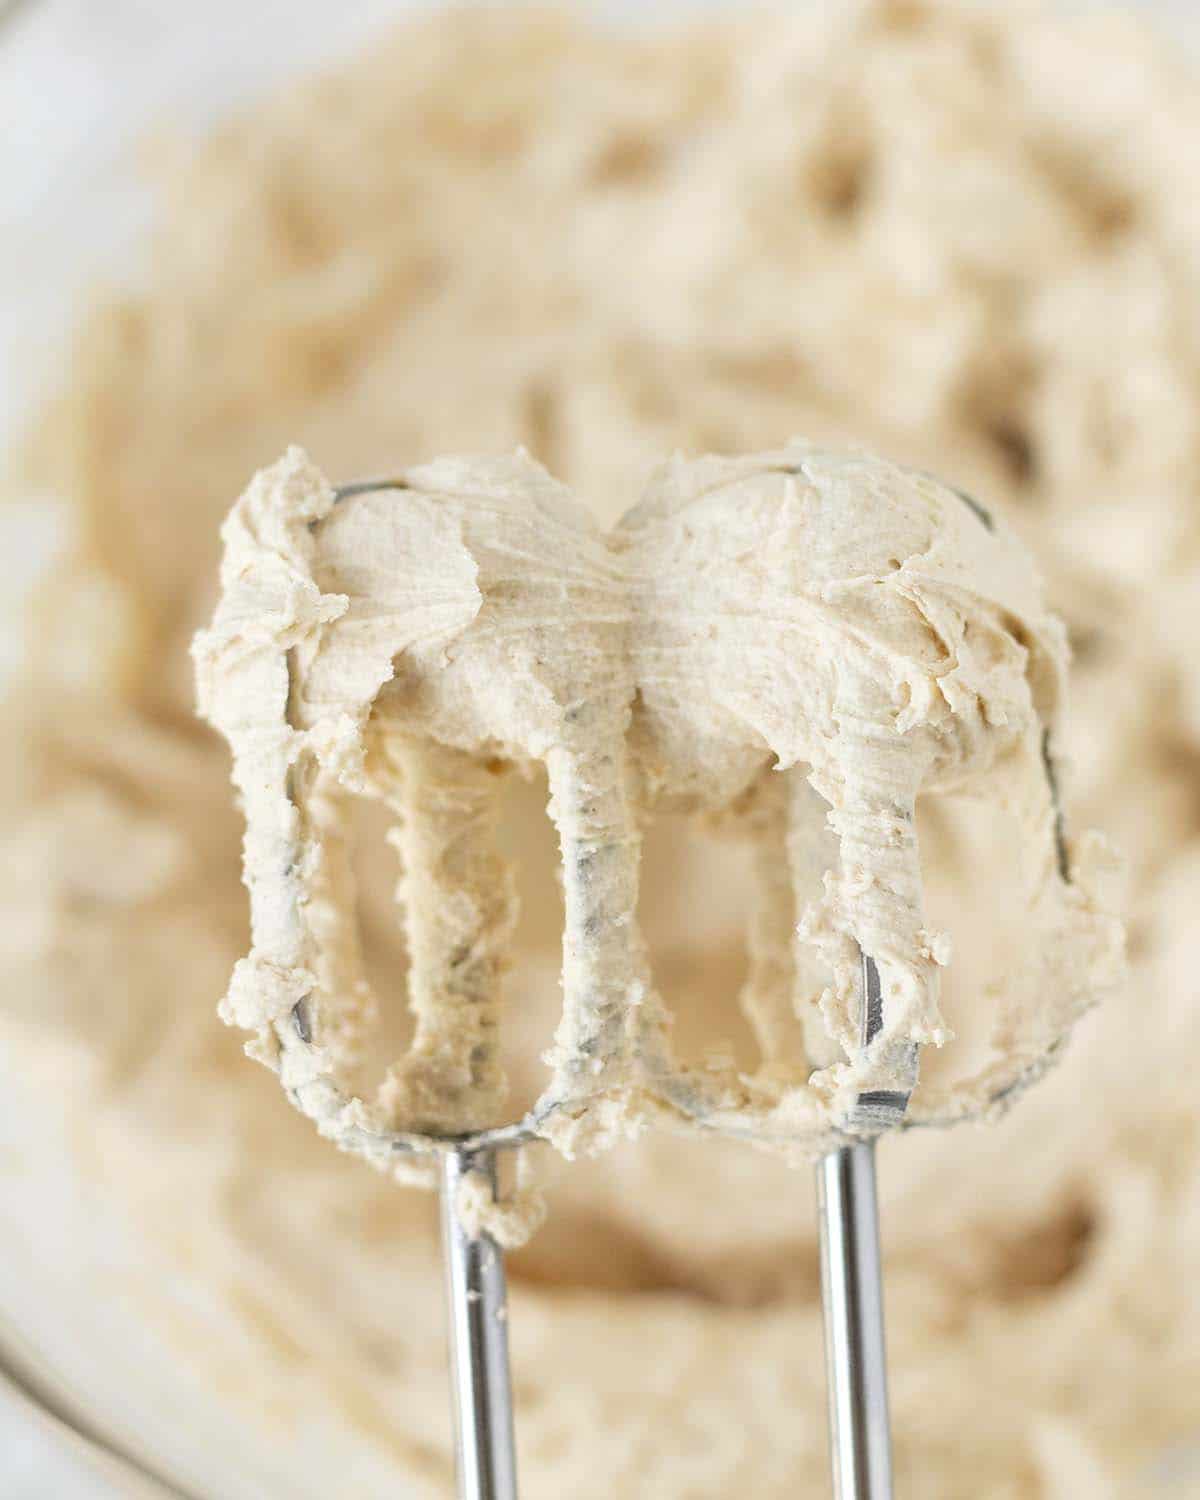 Image shows dairy-free peanut butter buttercream on the beaters of an electric mixer.